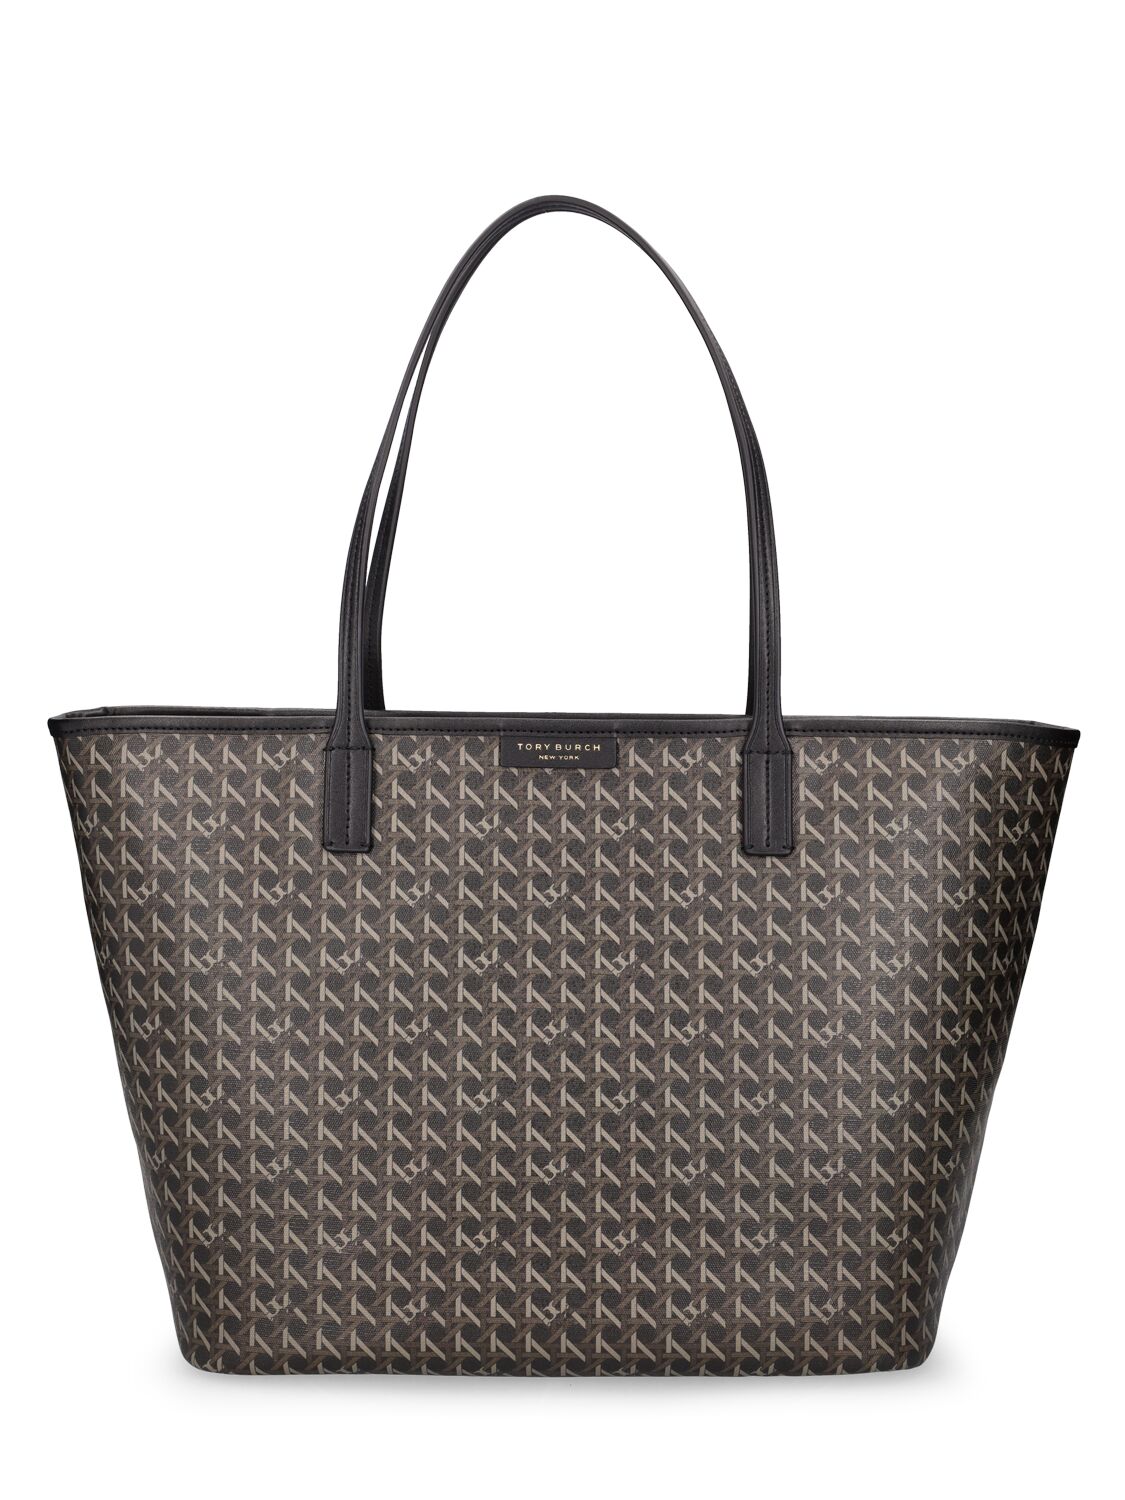 Tory Burch Ella Hand-crocheted Tote in Natural